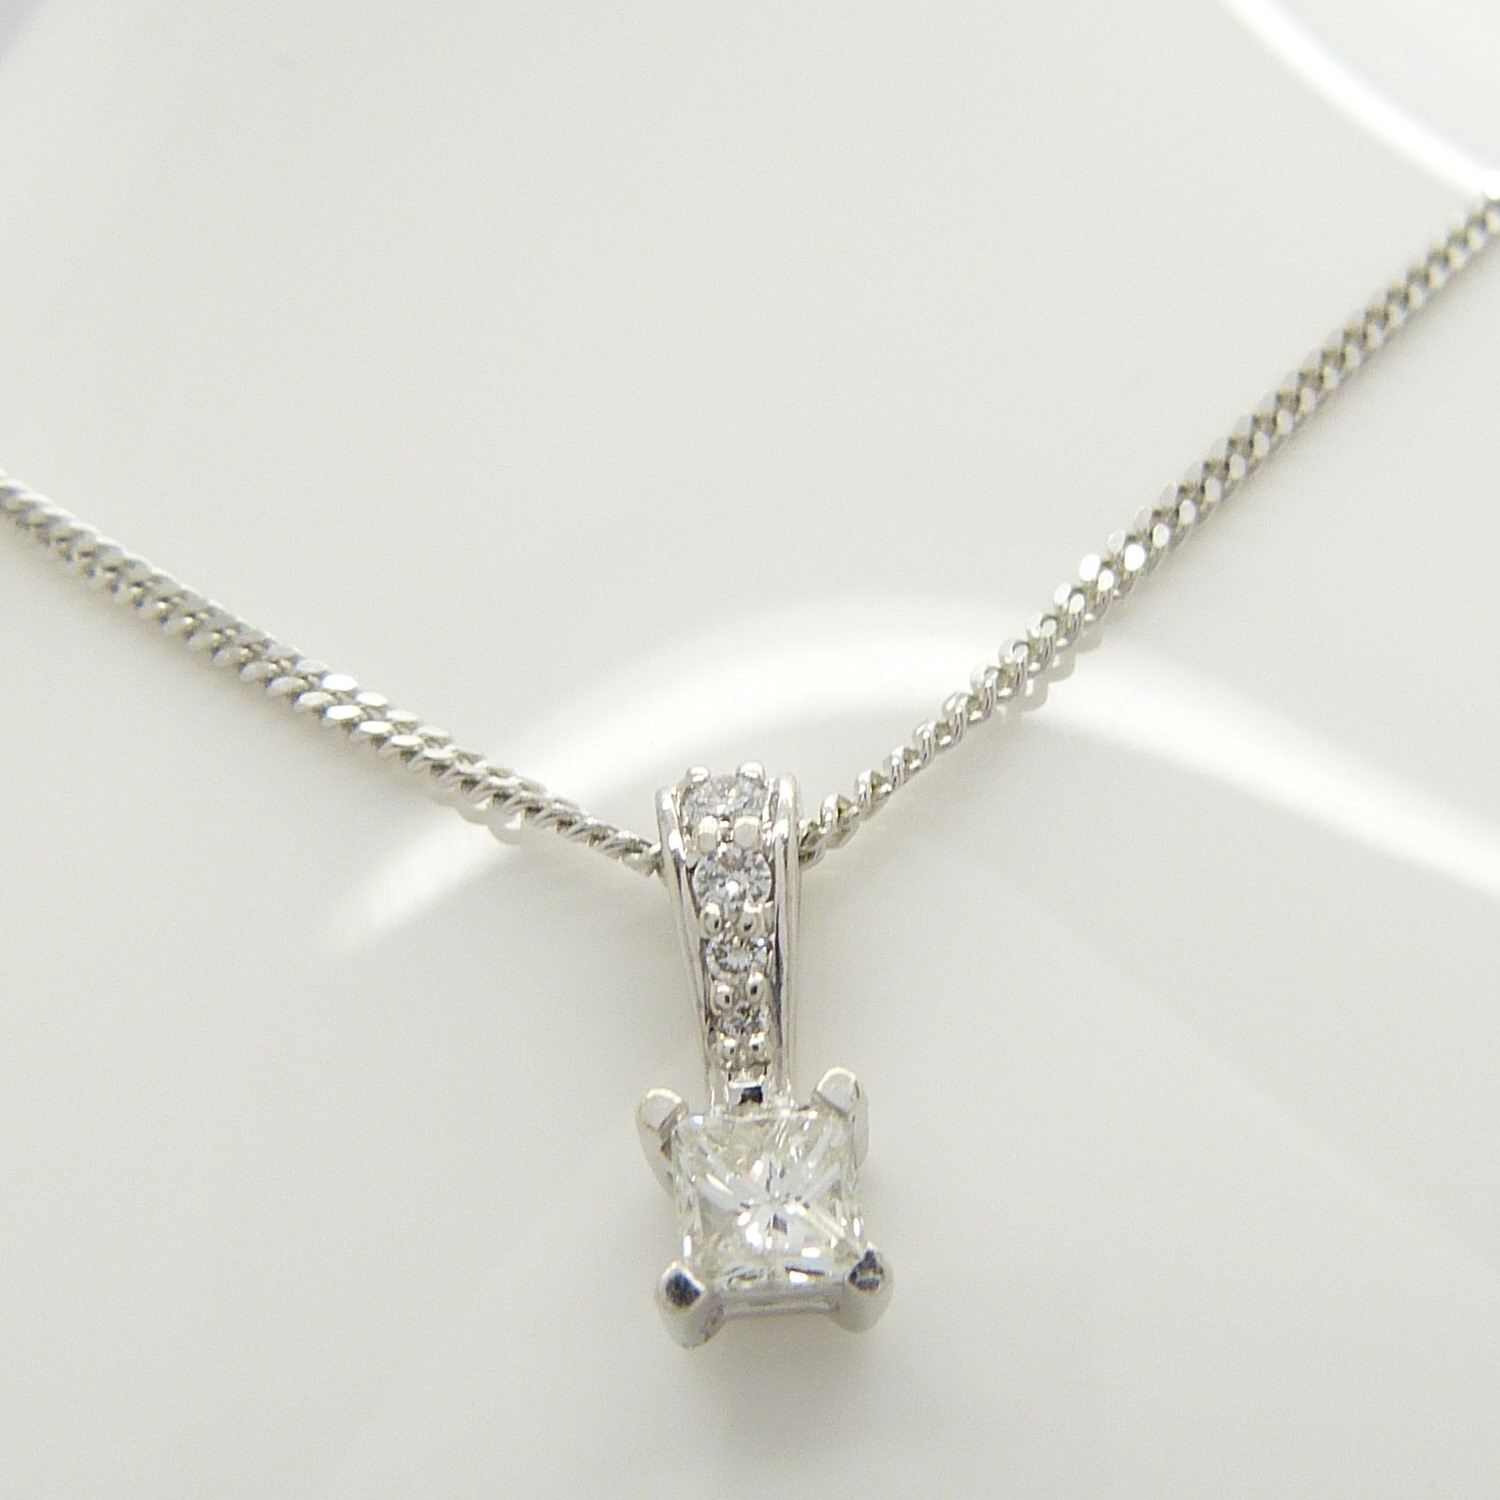 A pre-owned 0.30 carat princess-cut solitaire diamond pendant and chain, boxed - Image 7 of 9